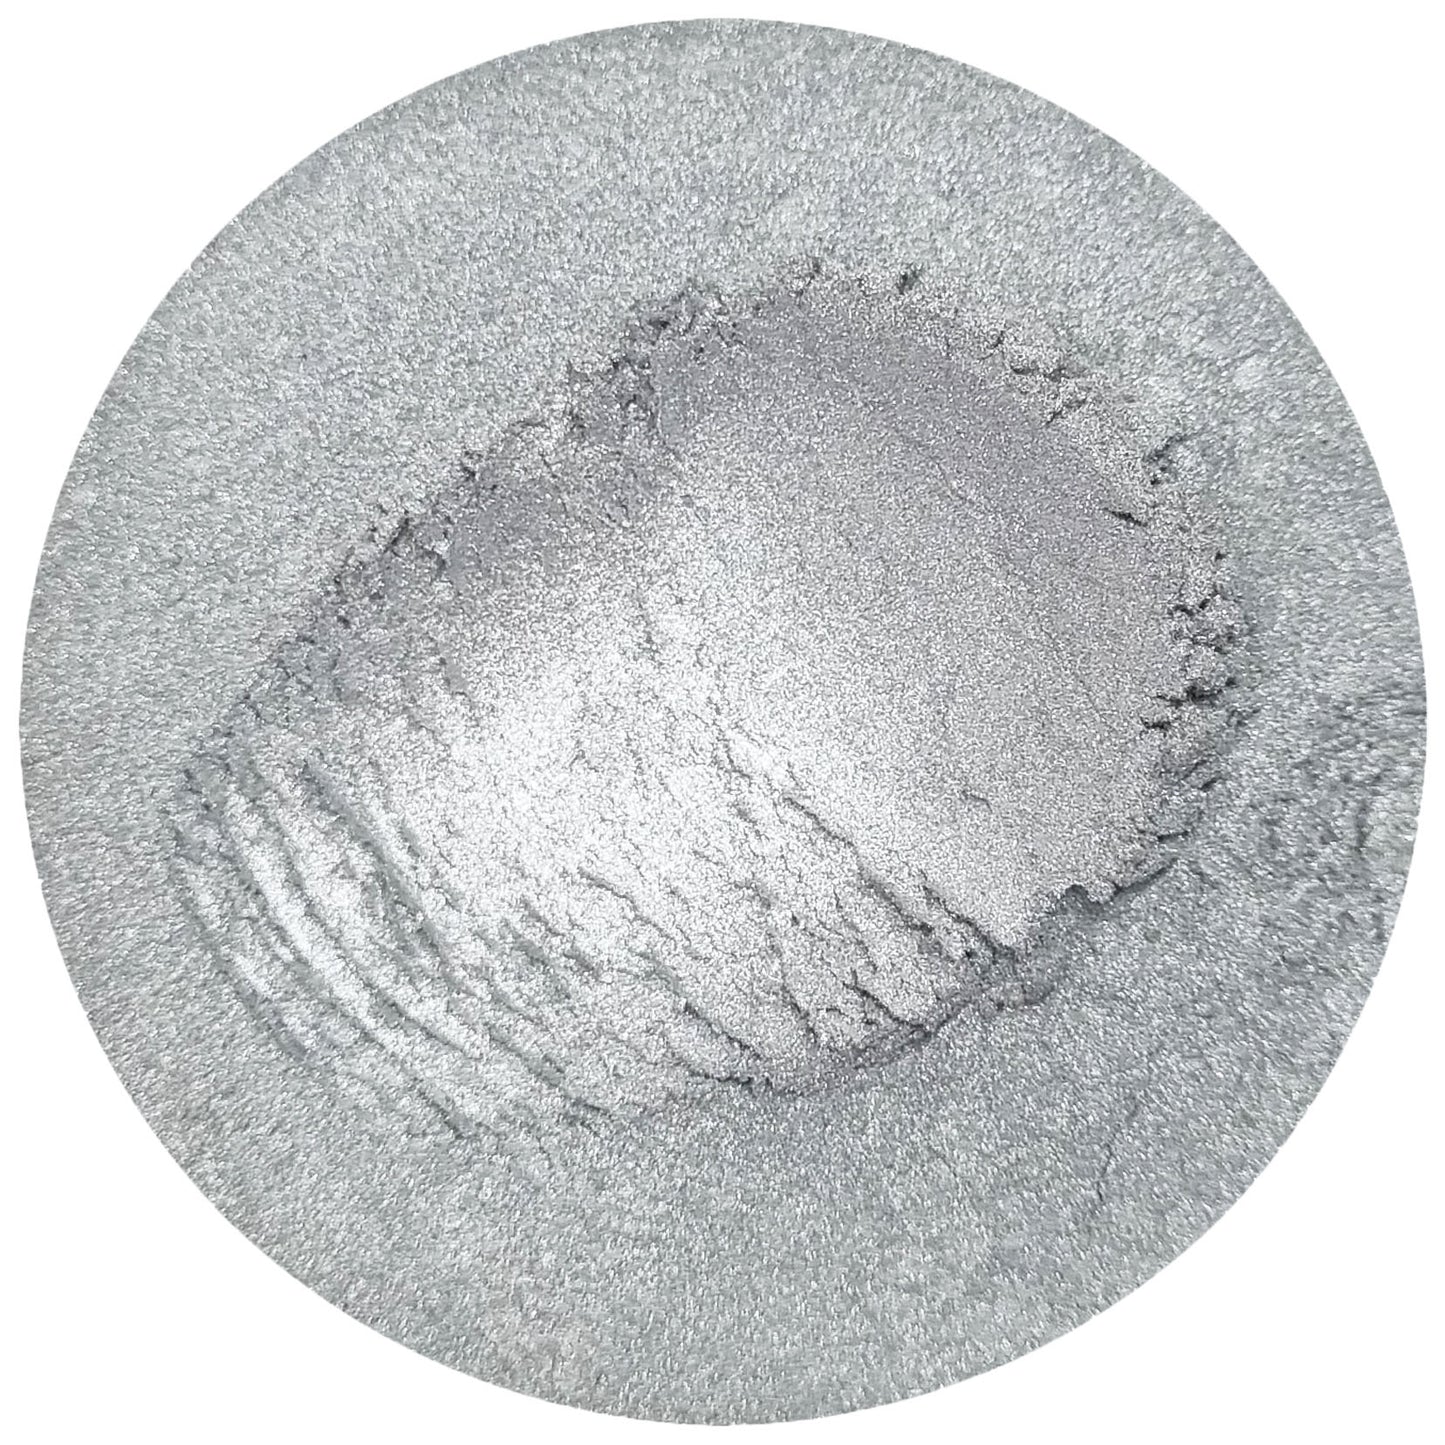 Silver Sparks | Pearlescent Cosmetic Mica | Truly Personal Ltd | Wax Melt Glitter